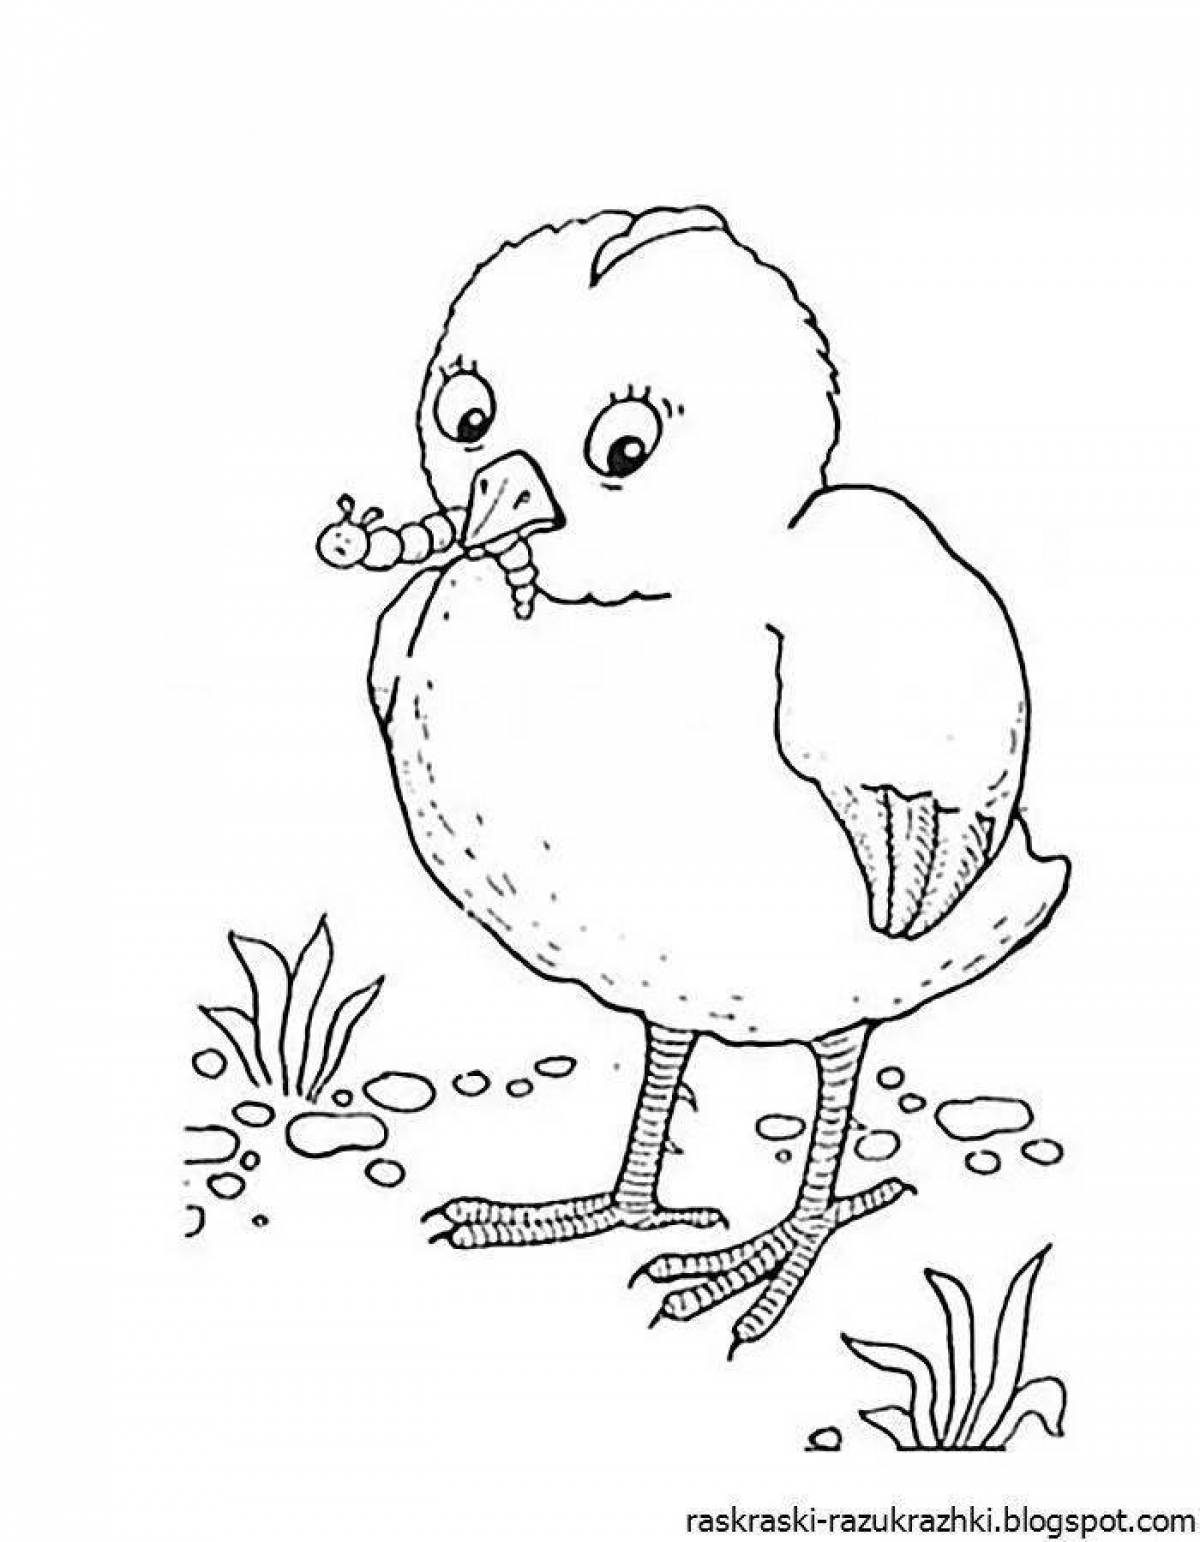 Impressive bird coloring page for kids